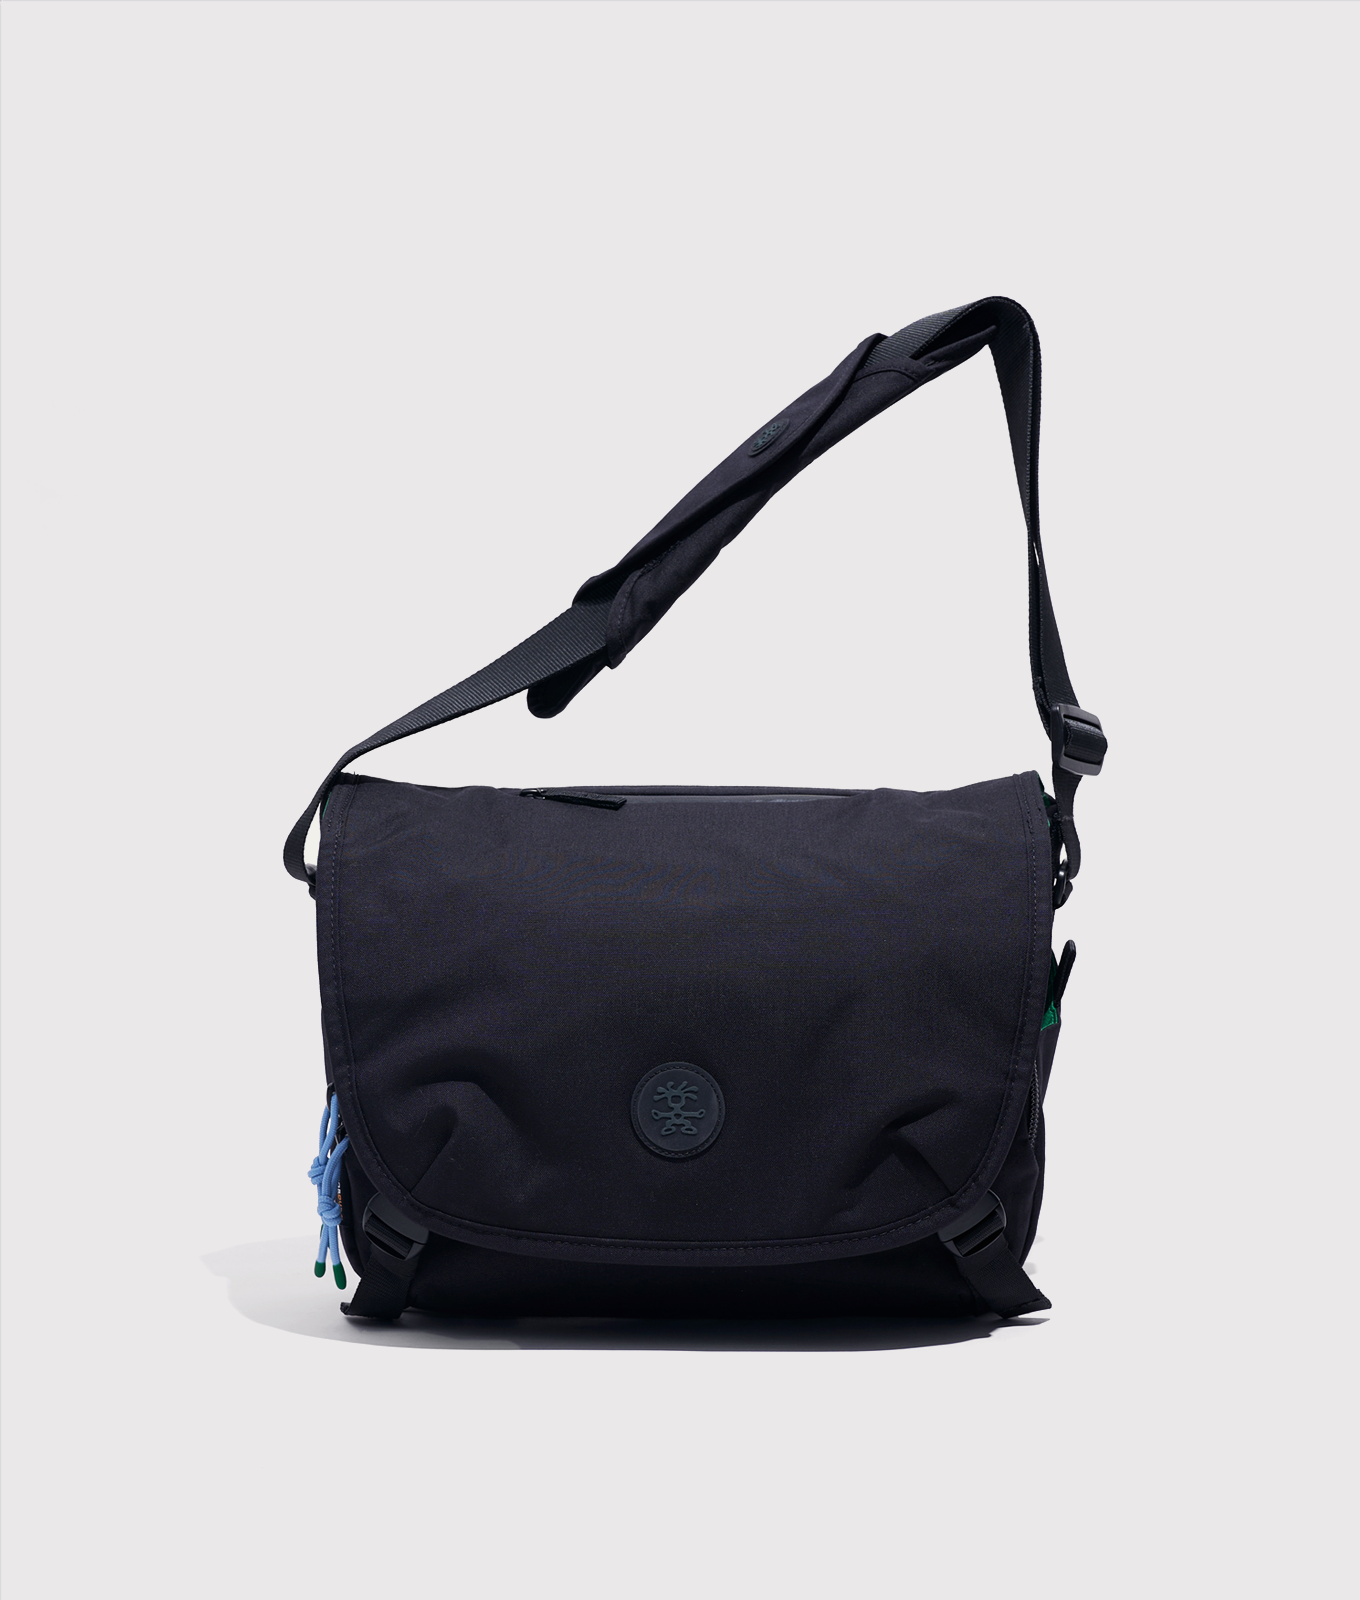 The Crumpler 5 Million Dollar Home Bag Review